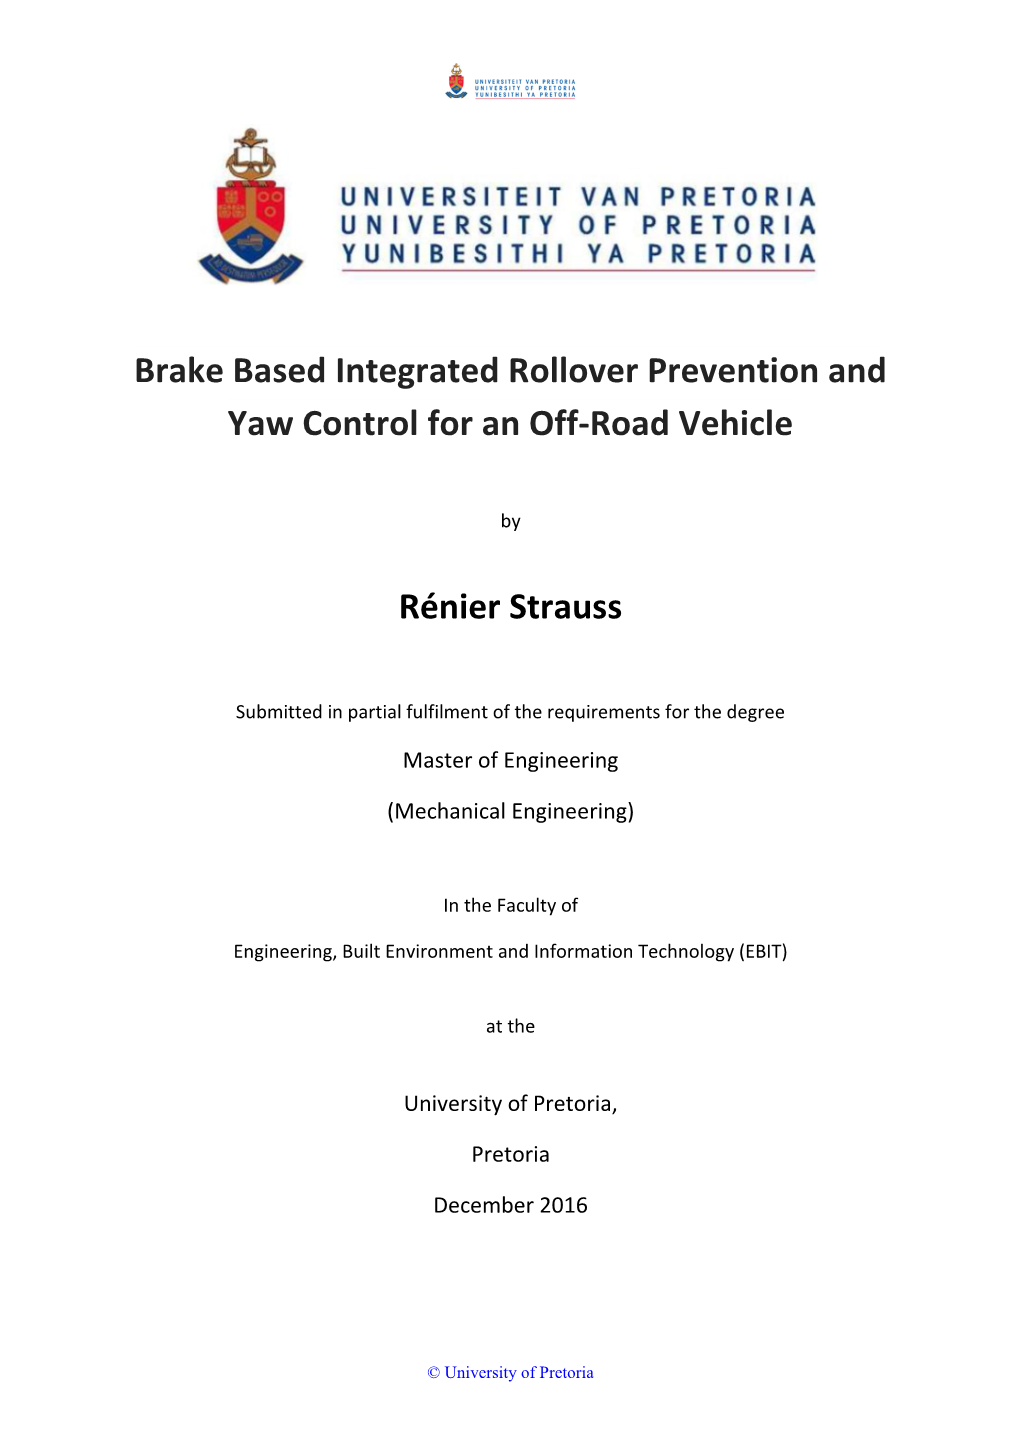 Brake Based Integrated Rollover Prevention and Yaw Control for an Off-Road Vehicle